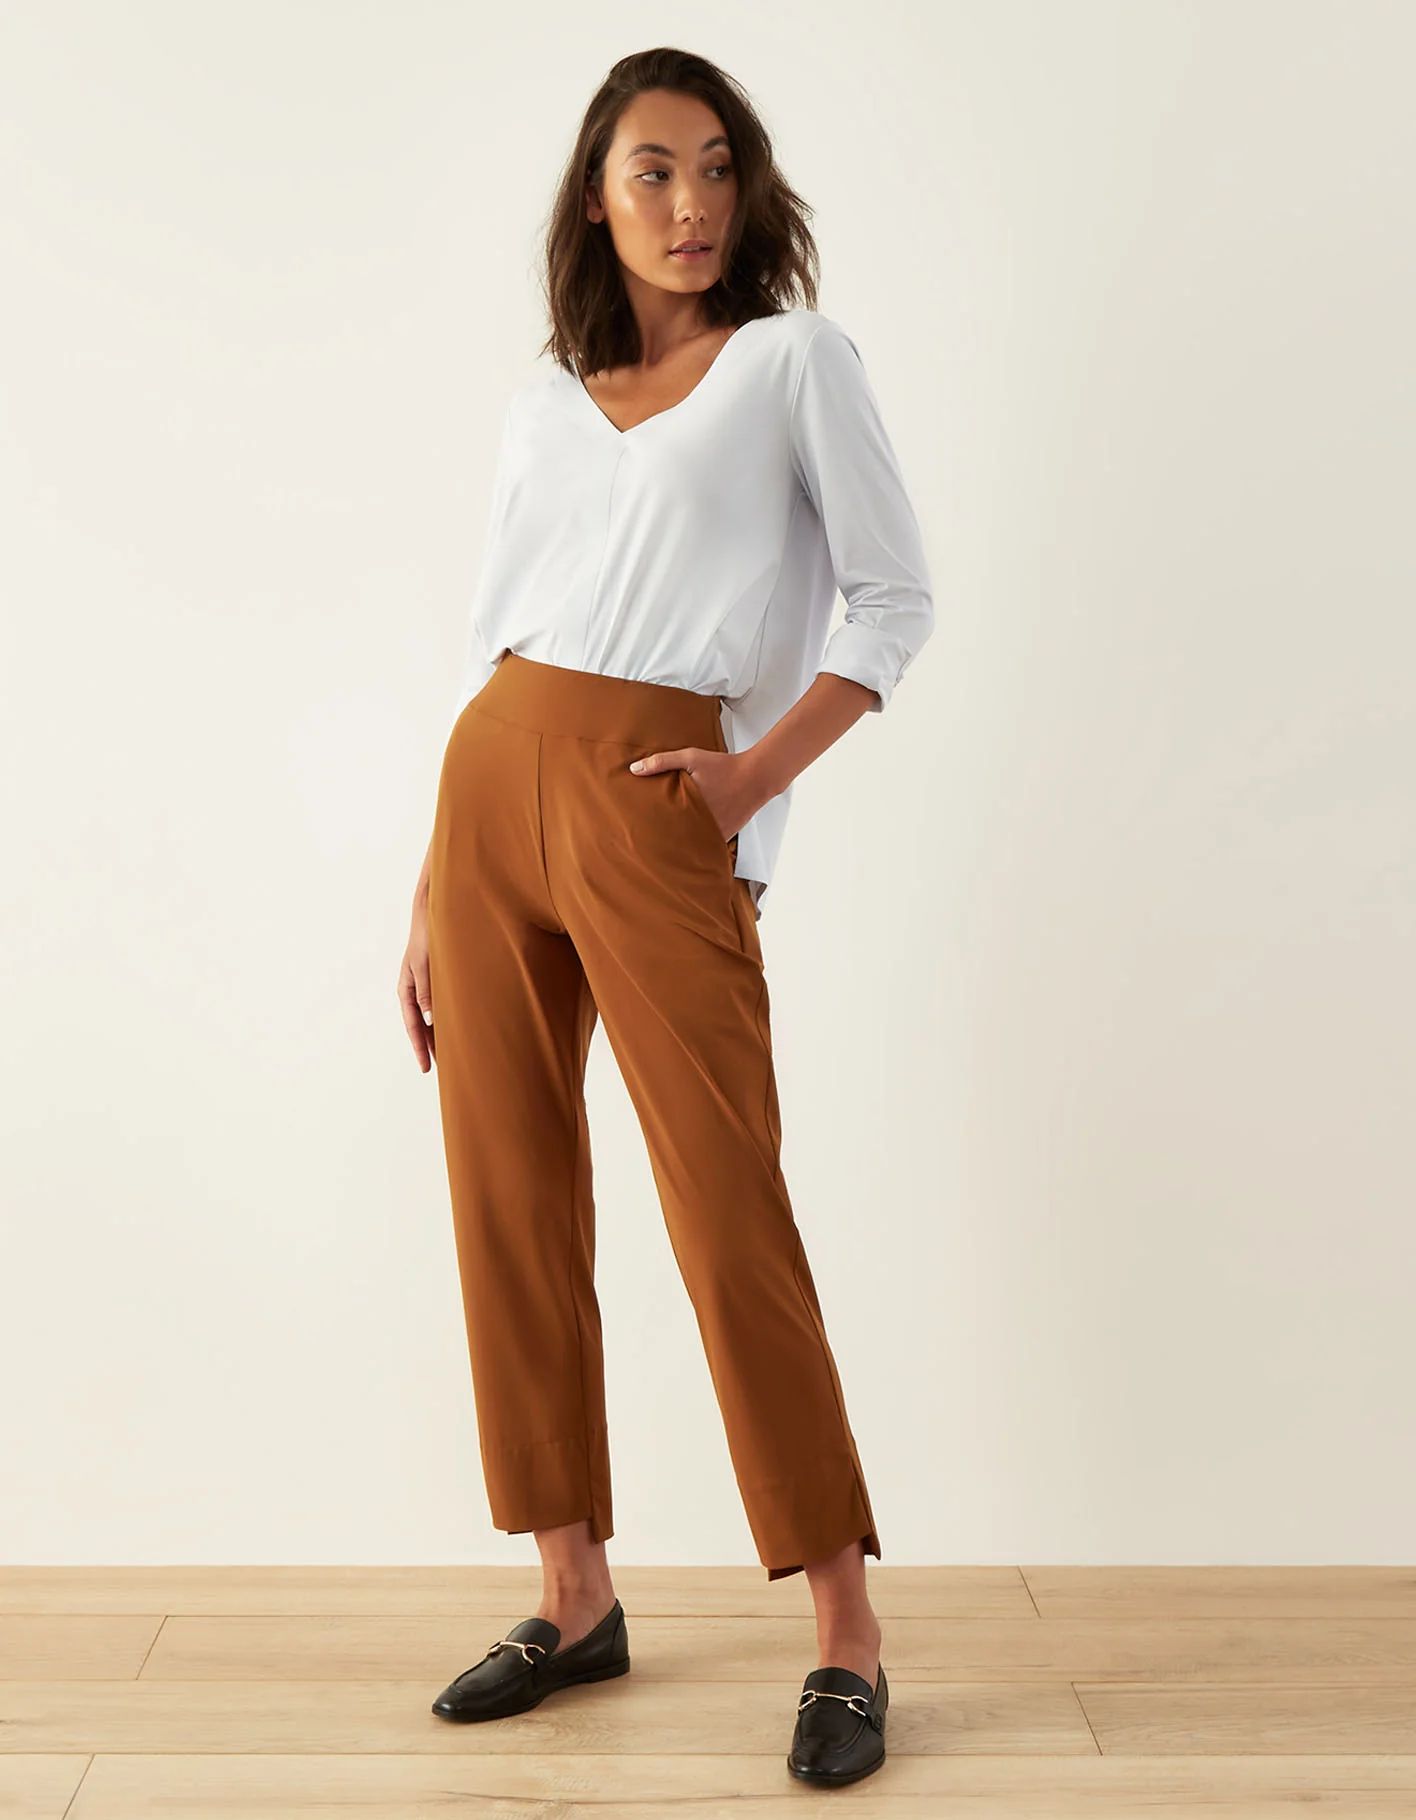 Straight Up Dress Pants | ADAY